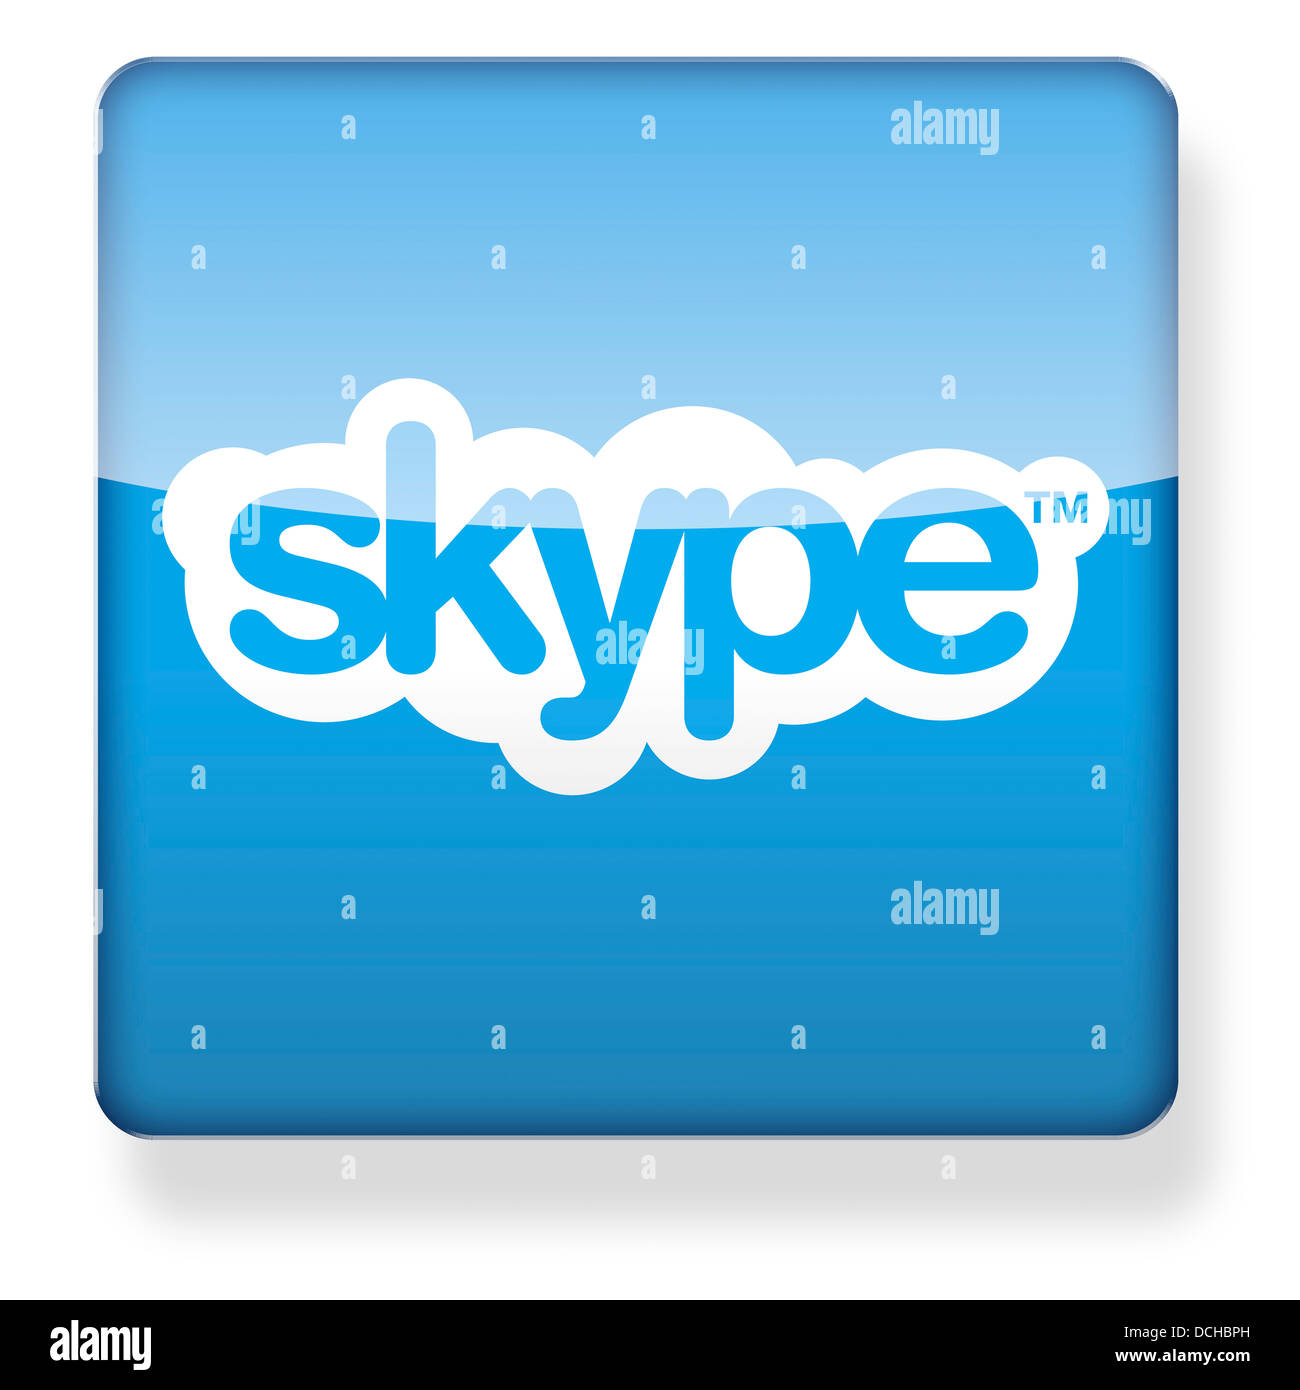 Skype logo as an app icon. Clipping path included. Stock Photo